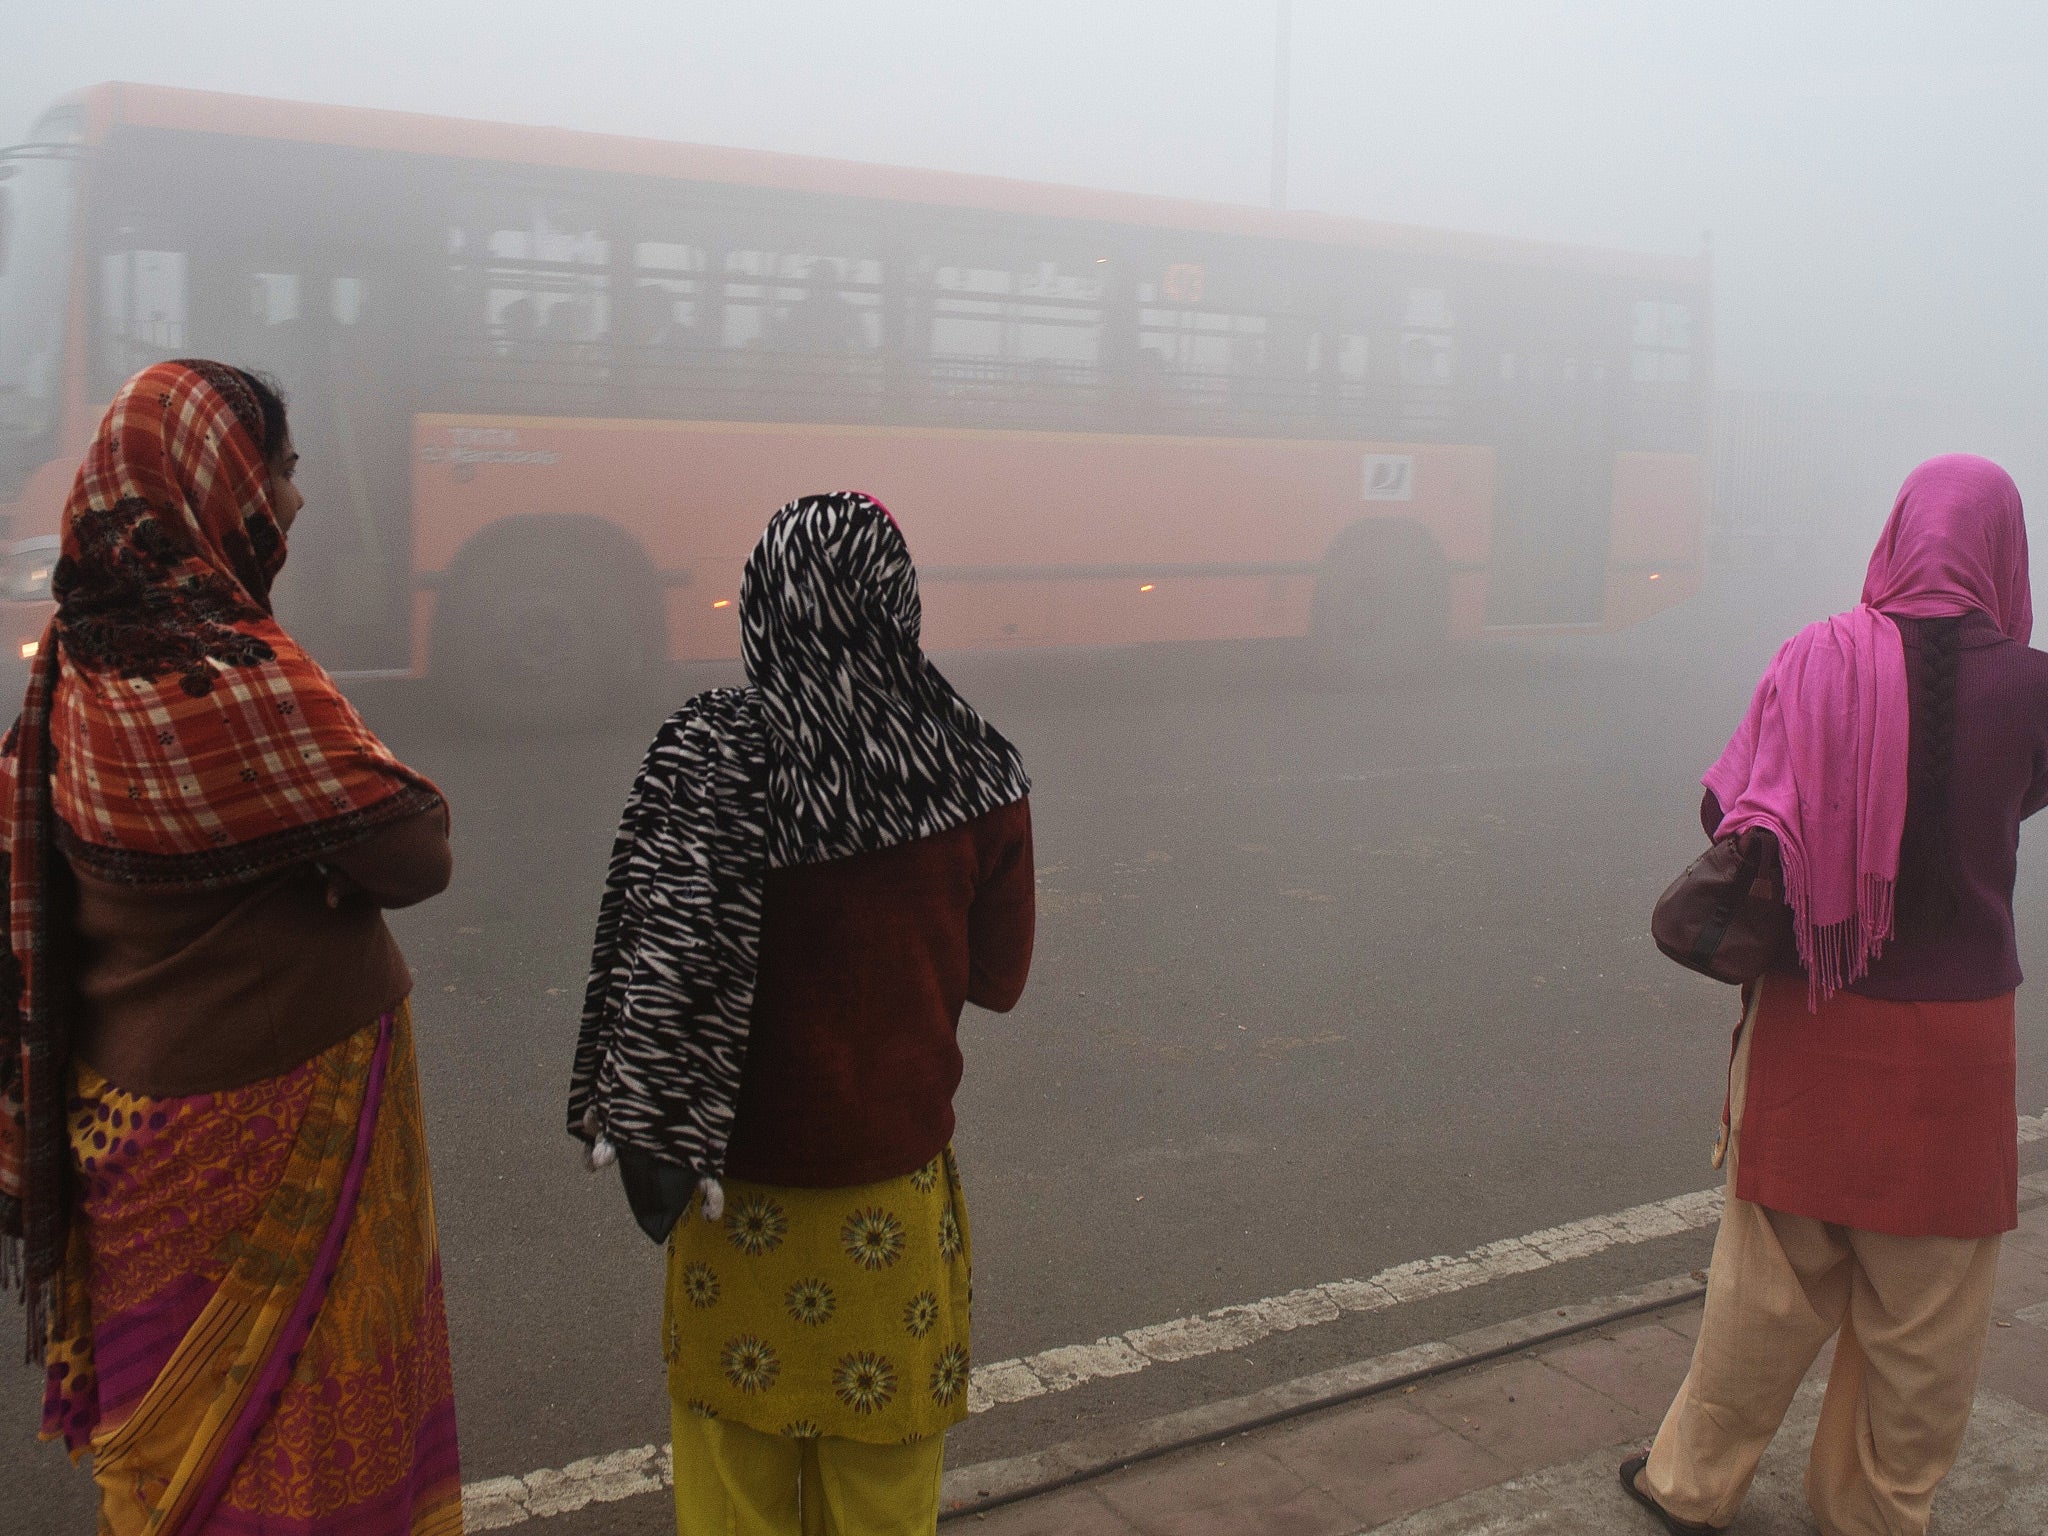 Anecdotal reports suggest this year has been one of the worst winters in Delhi for air quality and smog